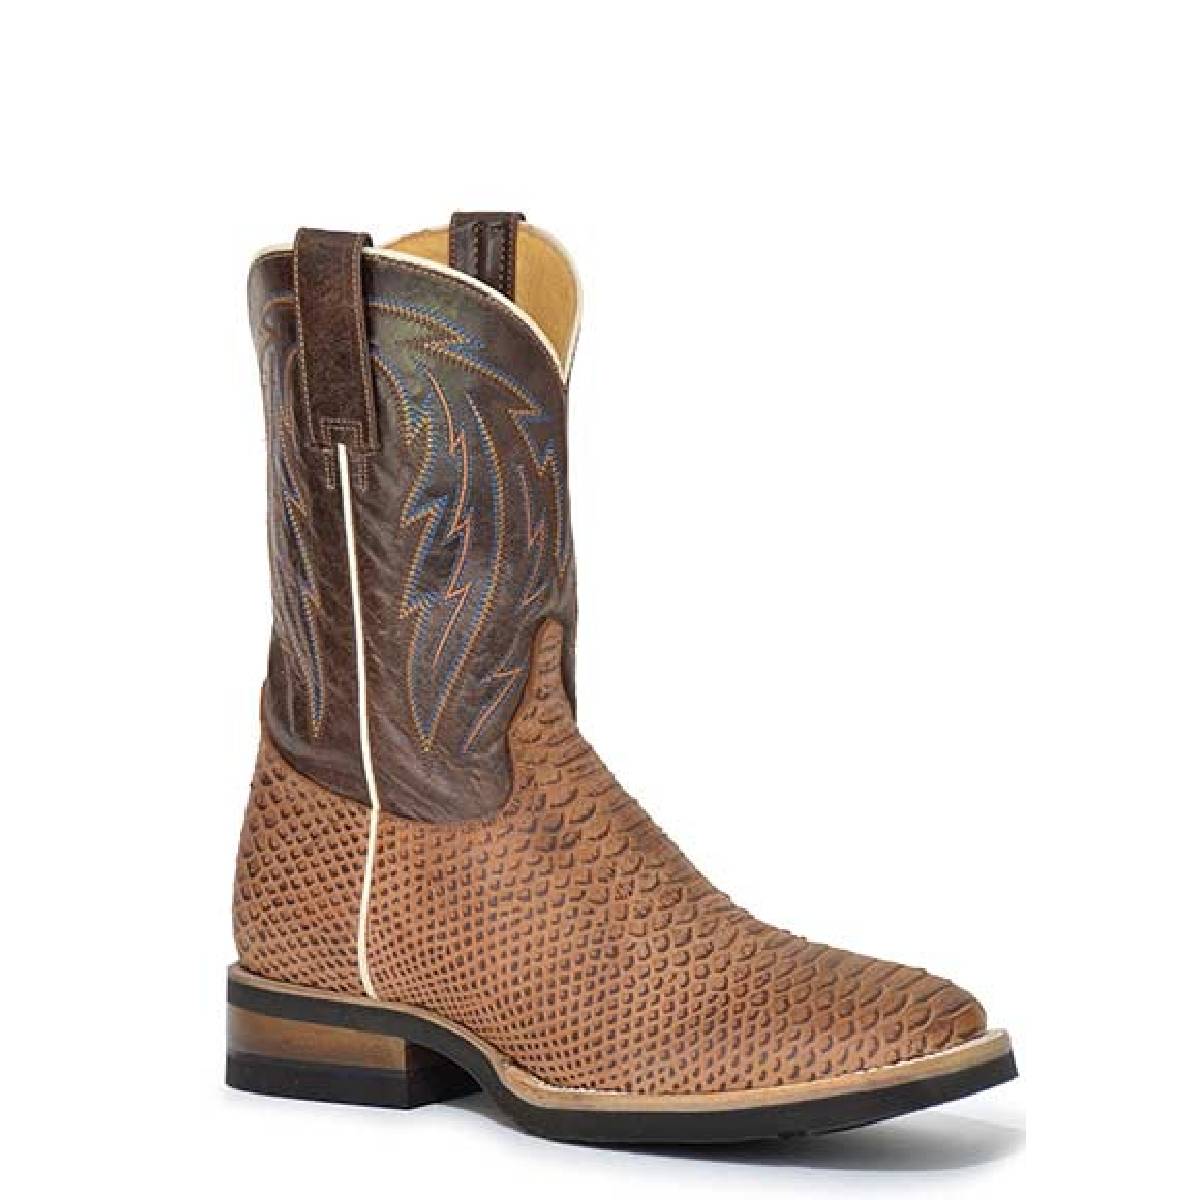 Men's Roper Almost Python PRINT GEO Sole Boots Handcrafted Brown - yeehawcowboy